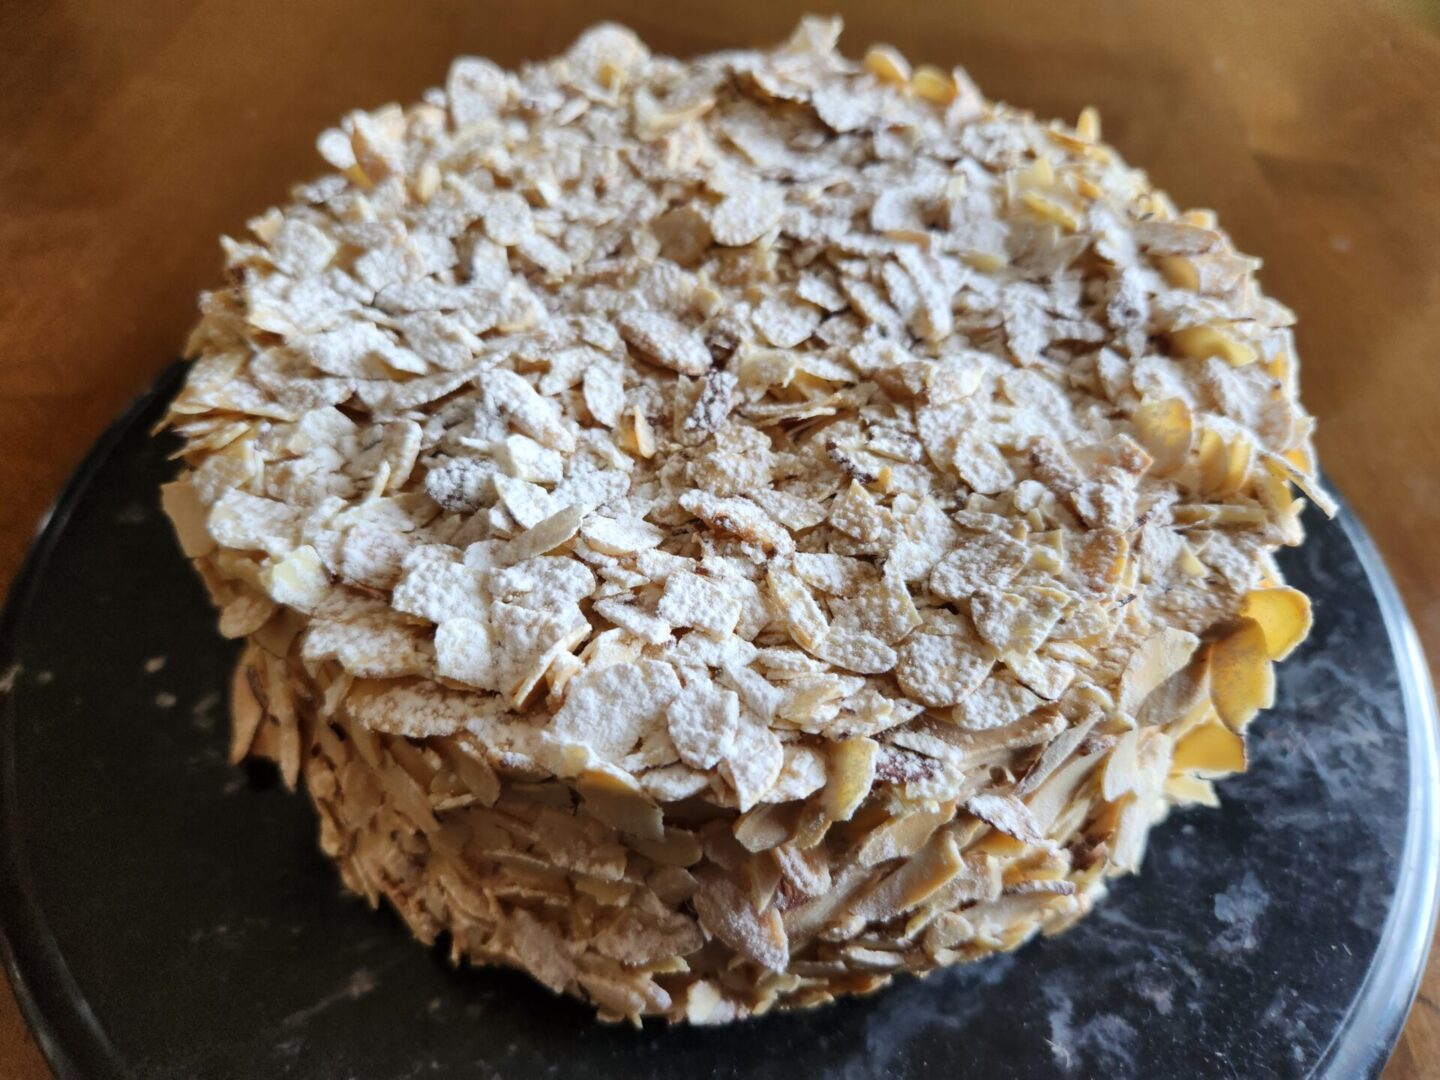 The Friday Baking Project is a blog featuring a delicious cake recipe topped with almonds and powdered sugar.